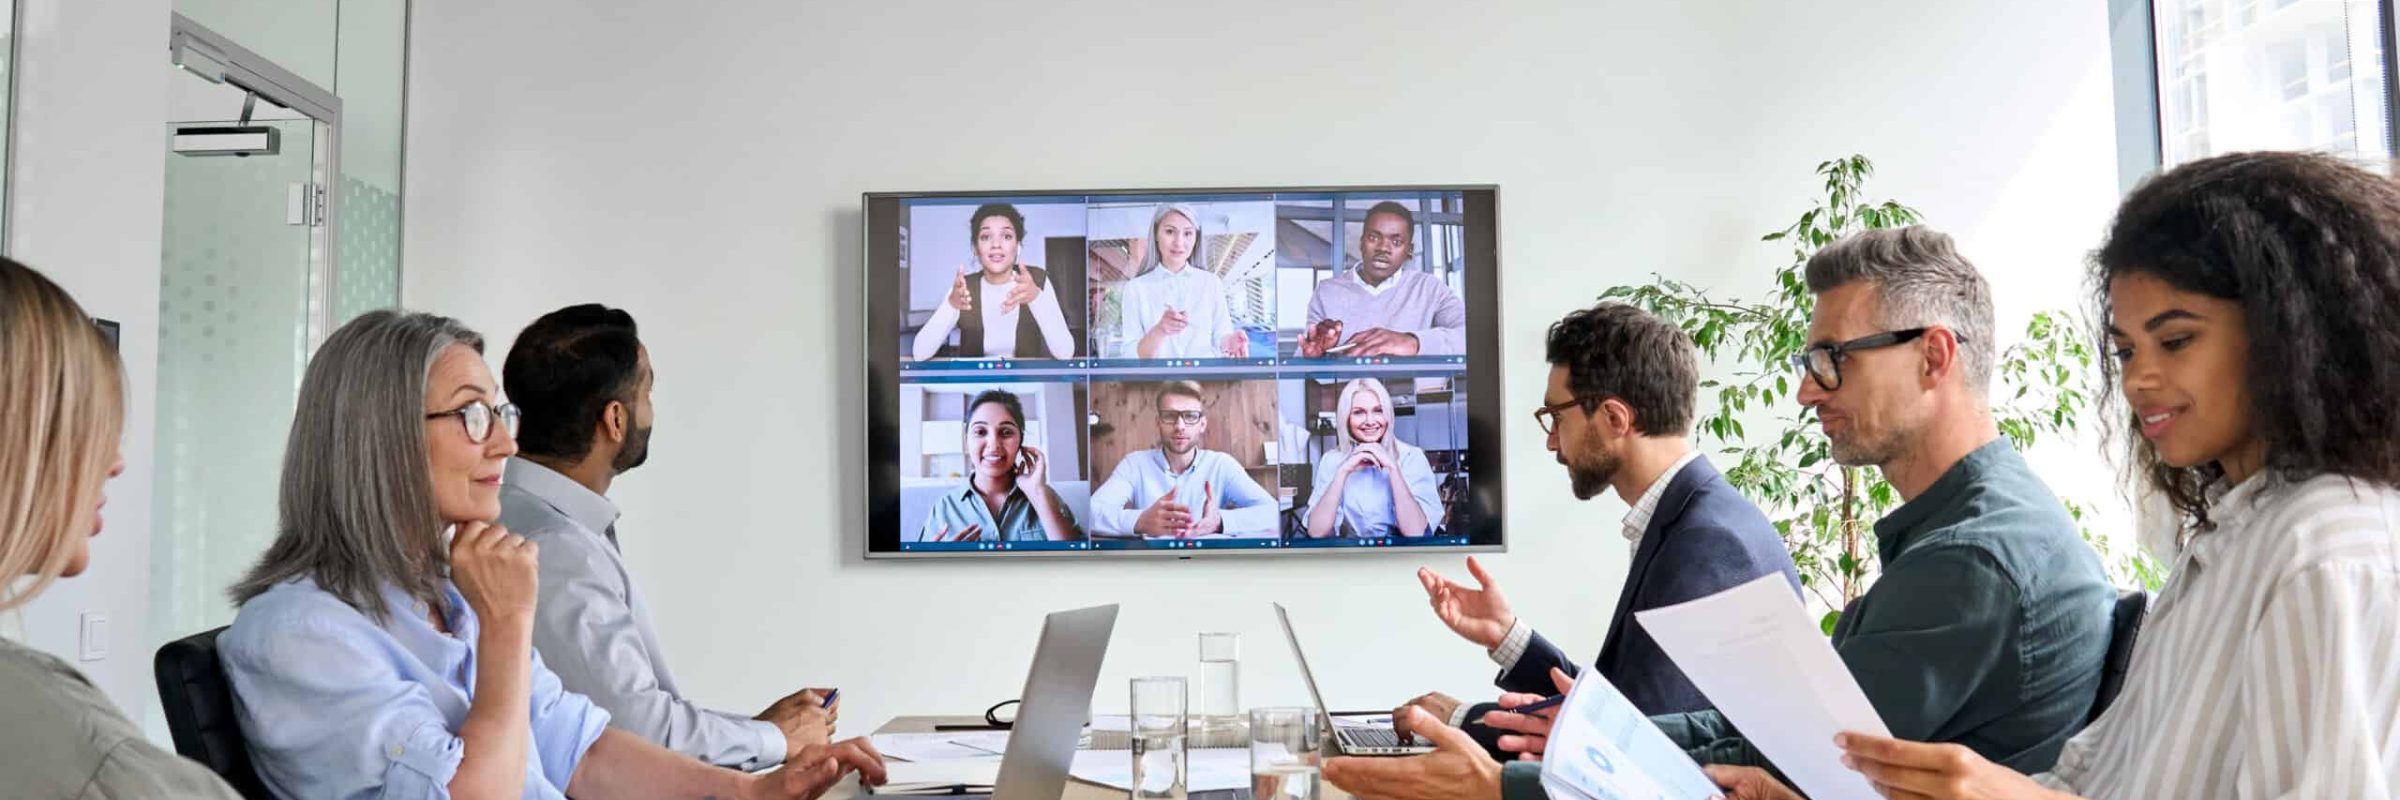 Diverse employees having online conference video call on tv screen monitor in board meeting room